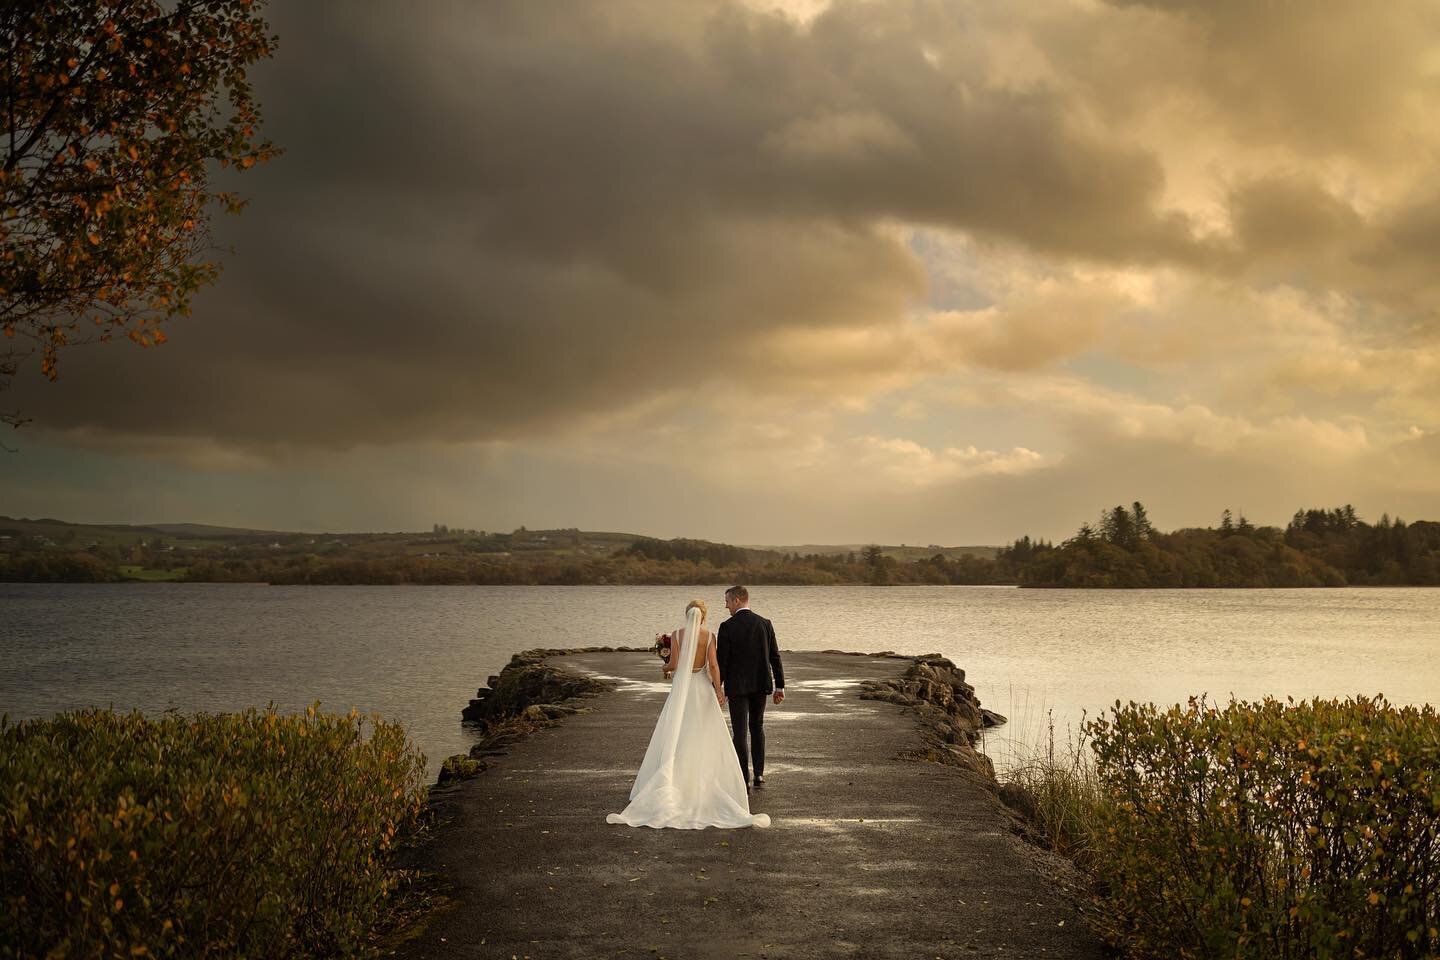 Sunsets and rainbows at Harvey&rsquo;s Point for the lovely @cara_jordan1 and @philipjordan7 

📍 @harveyspoint @donegalwedding 
💃 @teambride.ie 
💄 @shannon_dolan_hairdressing 
🌸 @nettles_petals 
🎸 @electriccircusweddings 
#Donegal #harveyspoint 